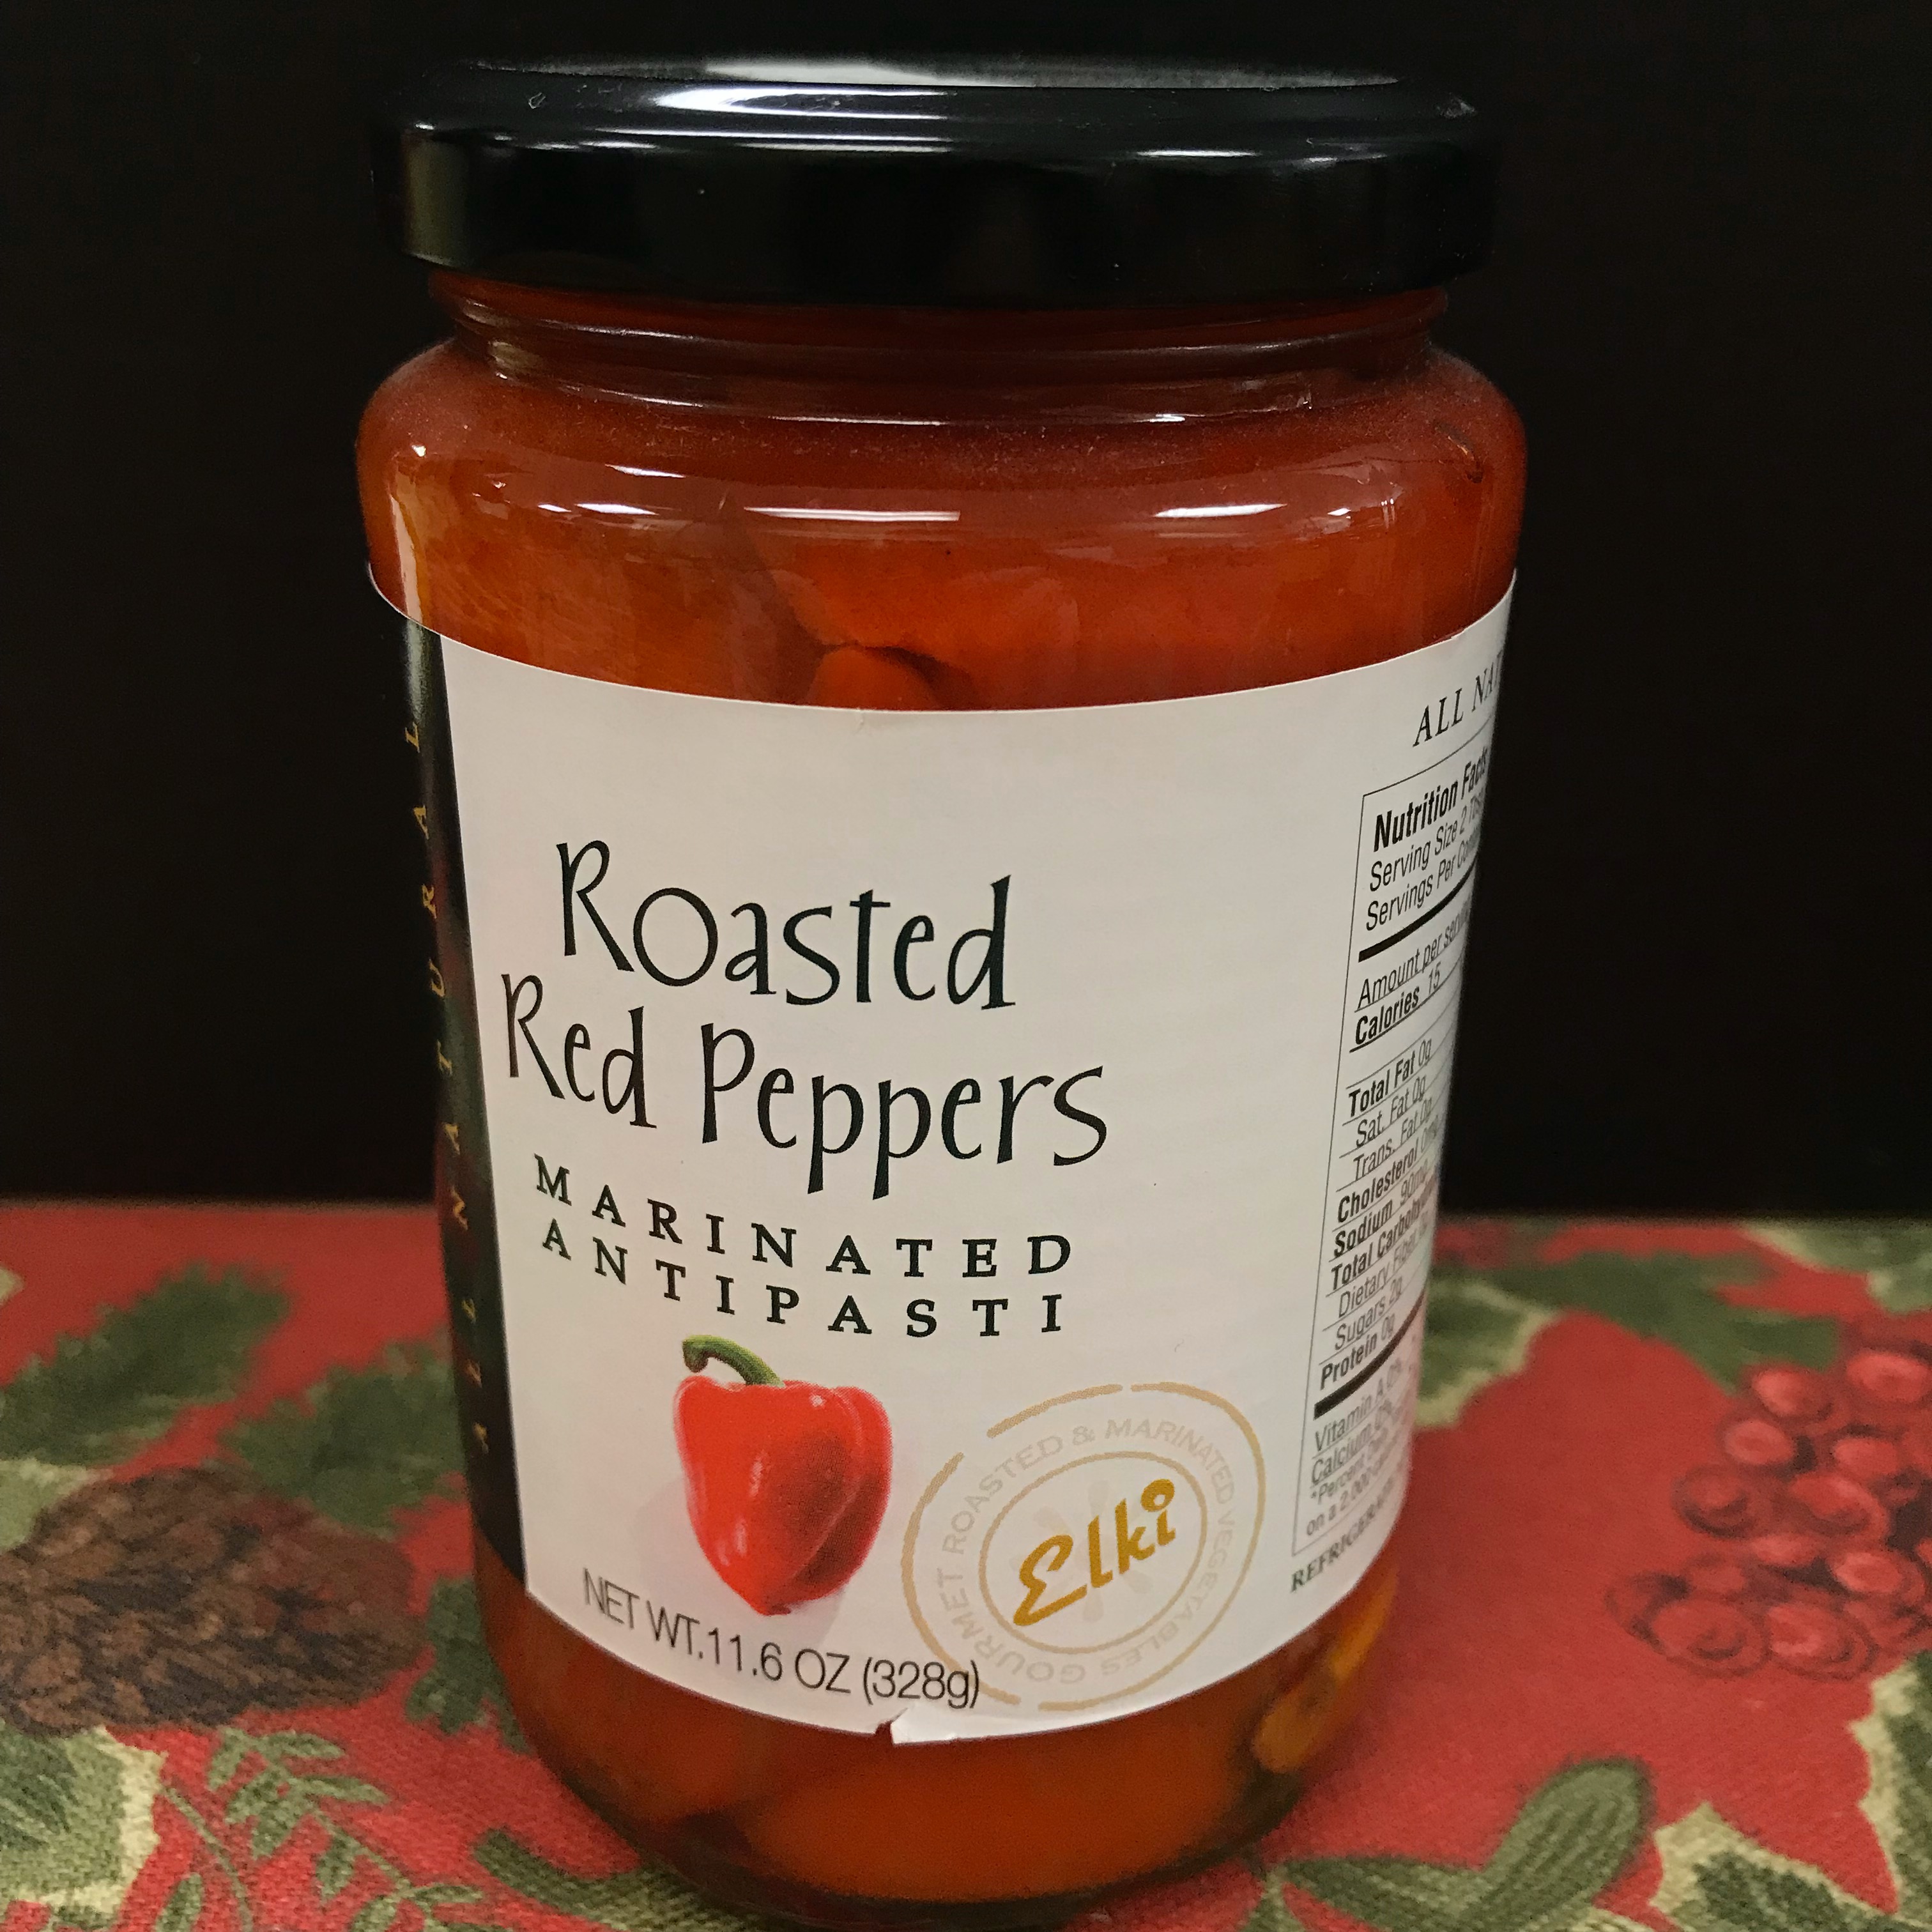 Roasted Red Peppers Marinated Antipasti all natural 12 oz